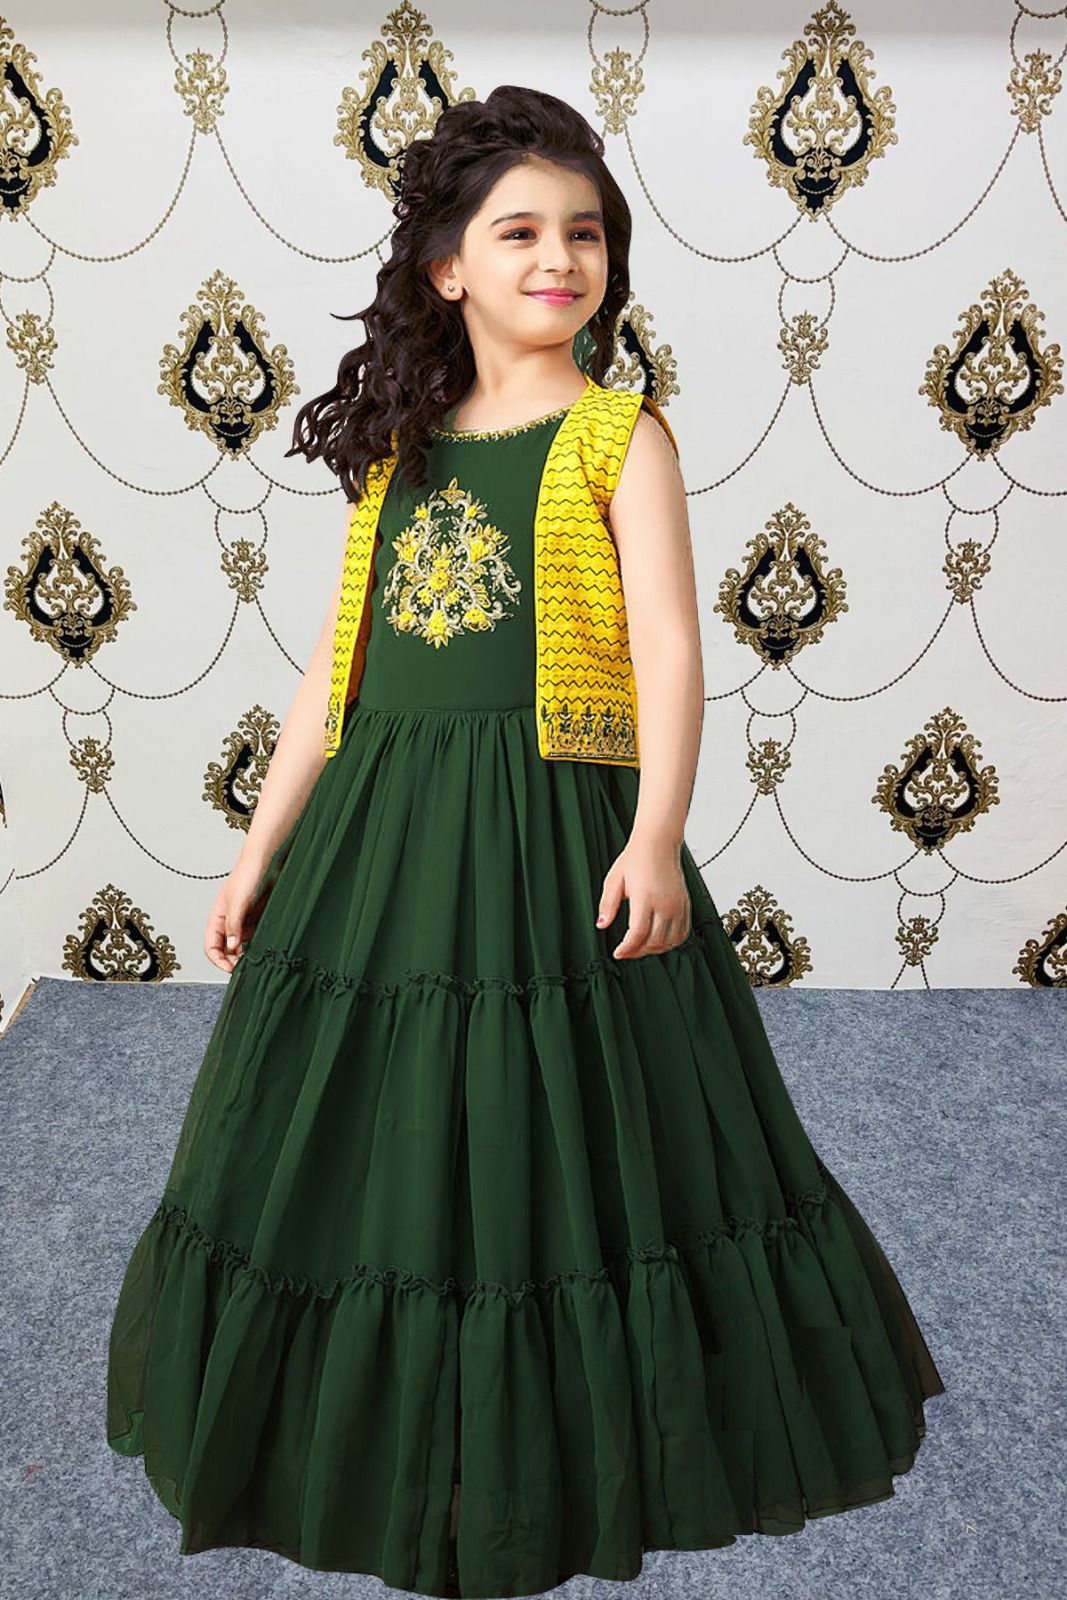 Fairy Look Kids Wear Green Color Gown With Yellow Jacket